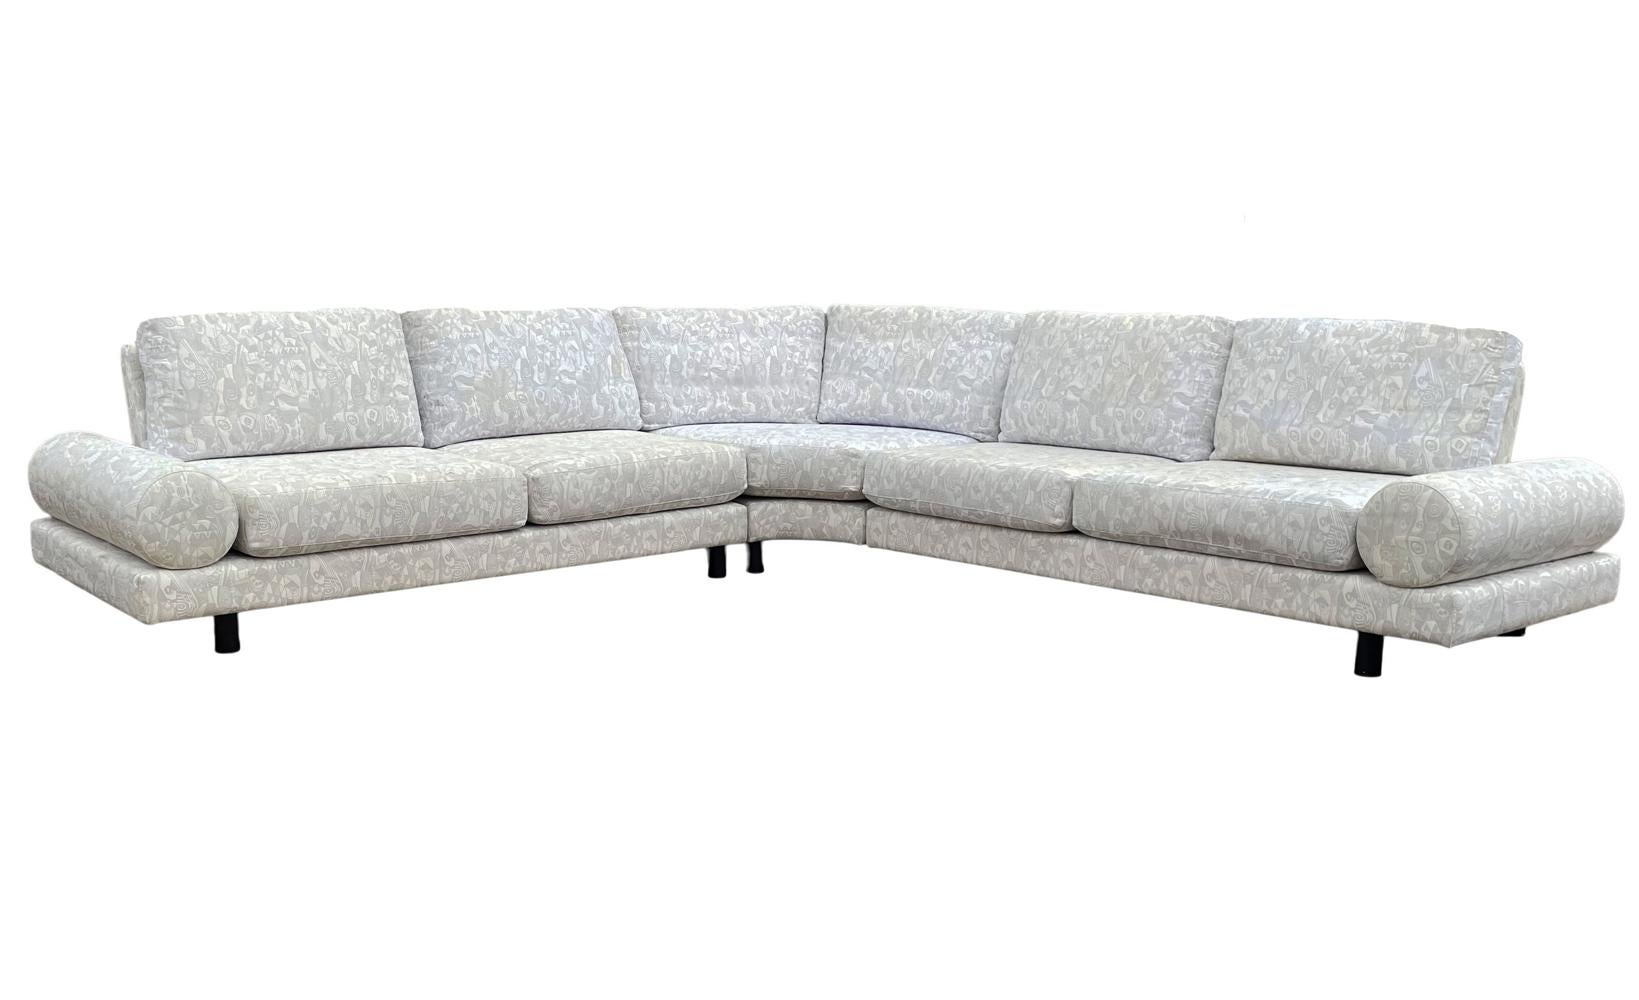 Late 20th Century Mid Century Italian Post Modern L-Shaped Sectional Sofa For Sale